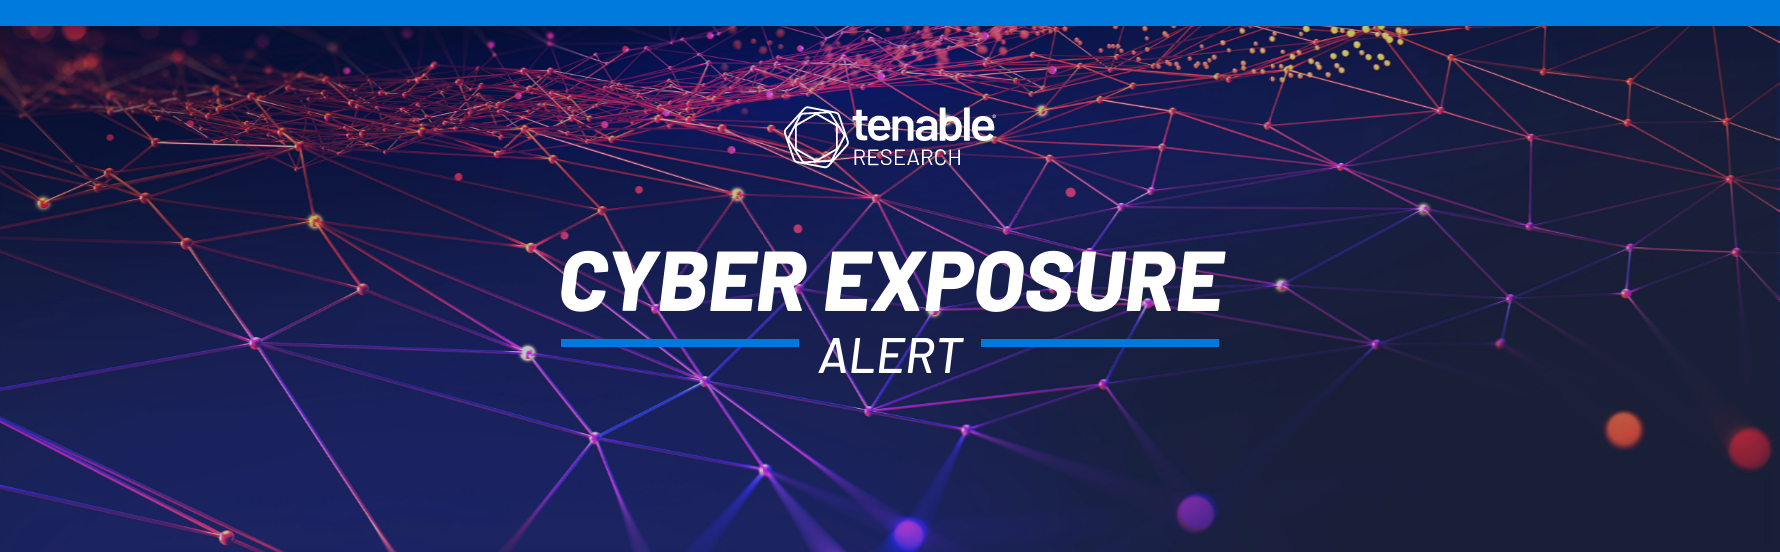 Tenable Research Cyber Exposure Alert for Sandworm APT Deploys New SwiftSlicer Wiper Using Active Directory Group Policy